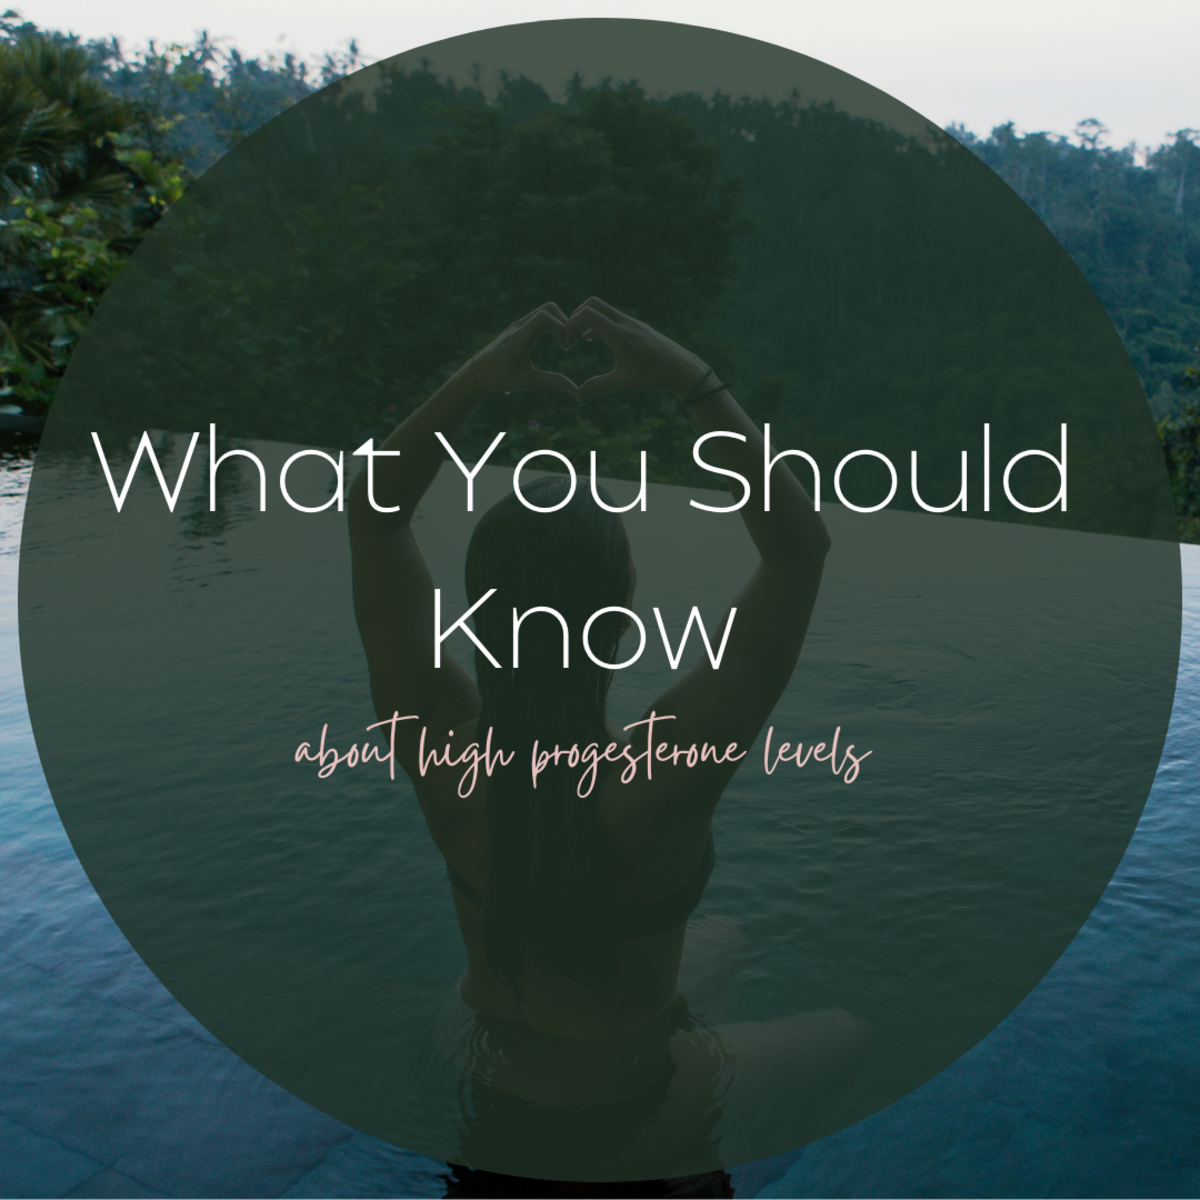 High Progesterone: What You Need to Know